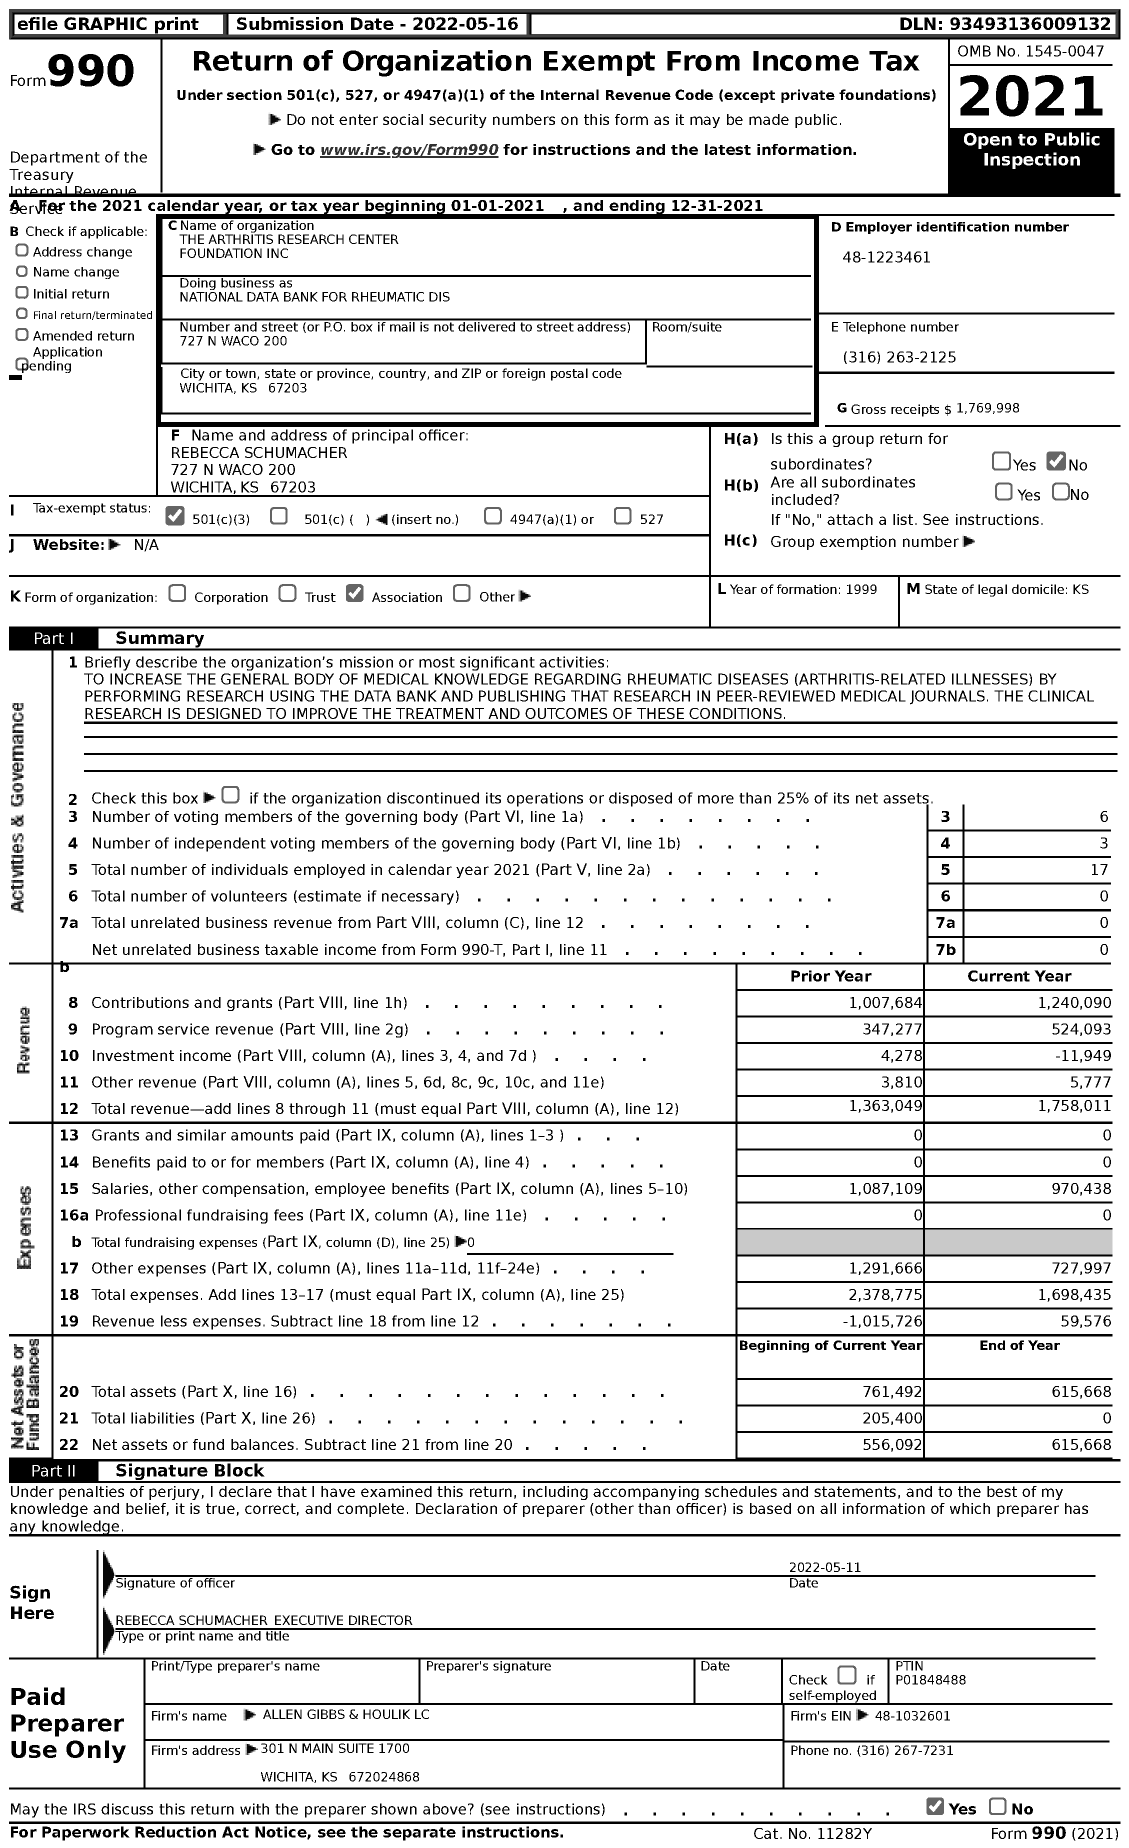 Image of first page of 2021 Form 990 for National Data Bank for Rheumatic Dis